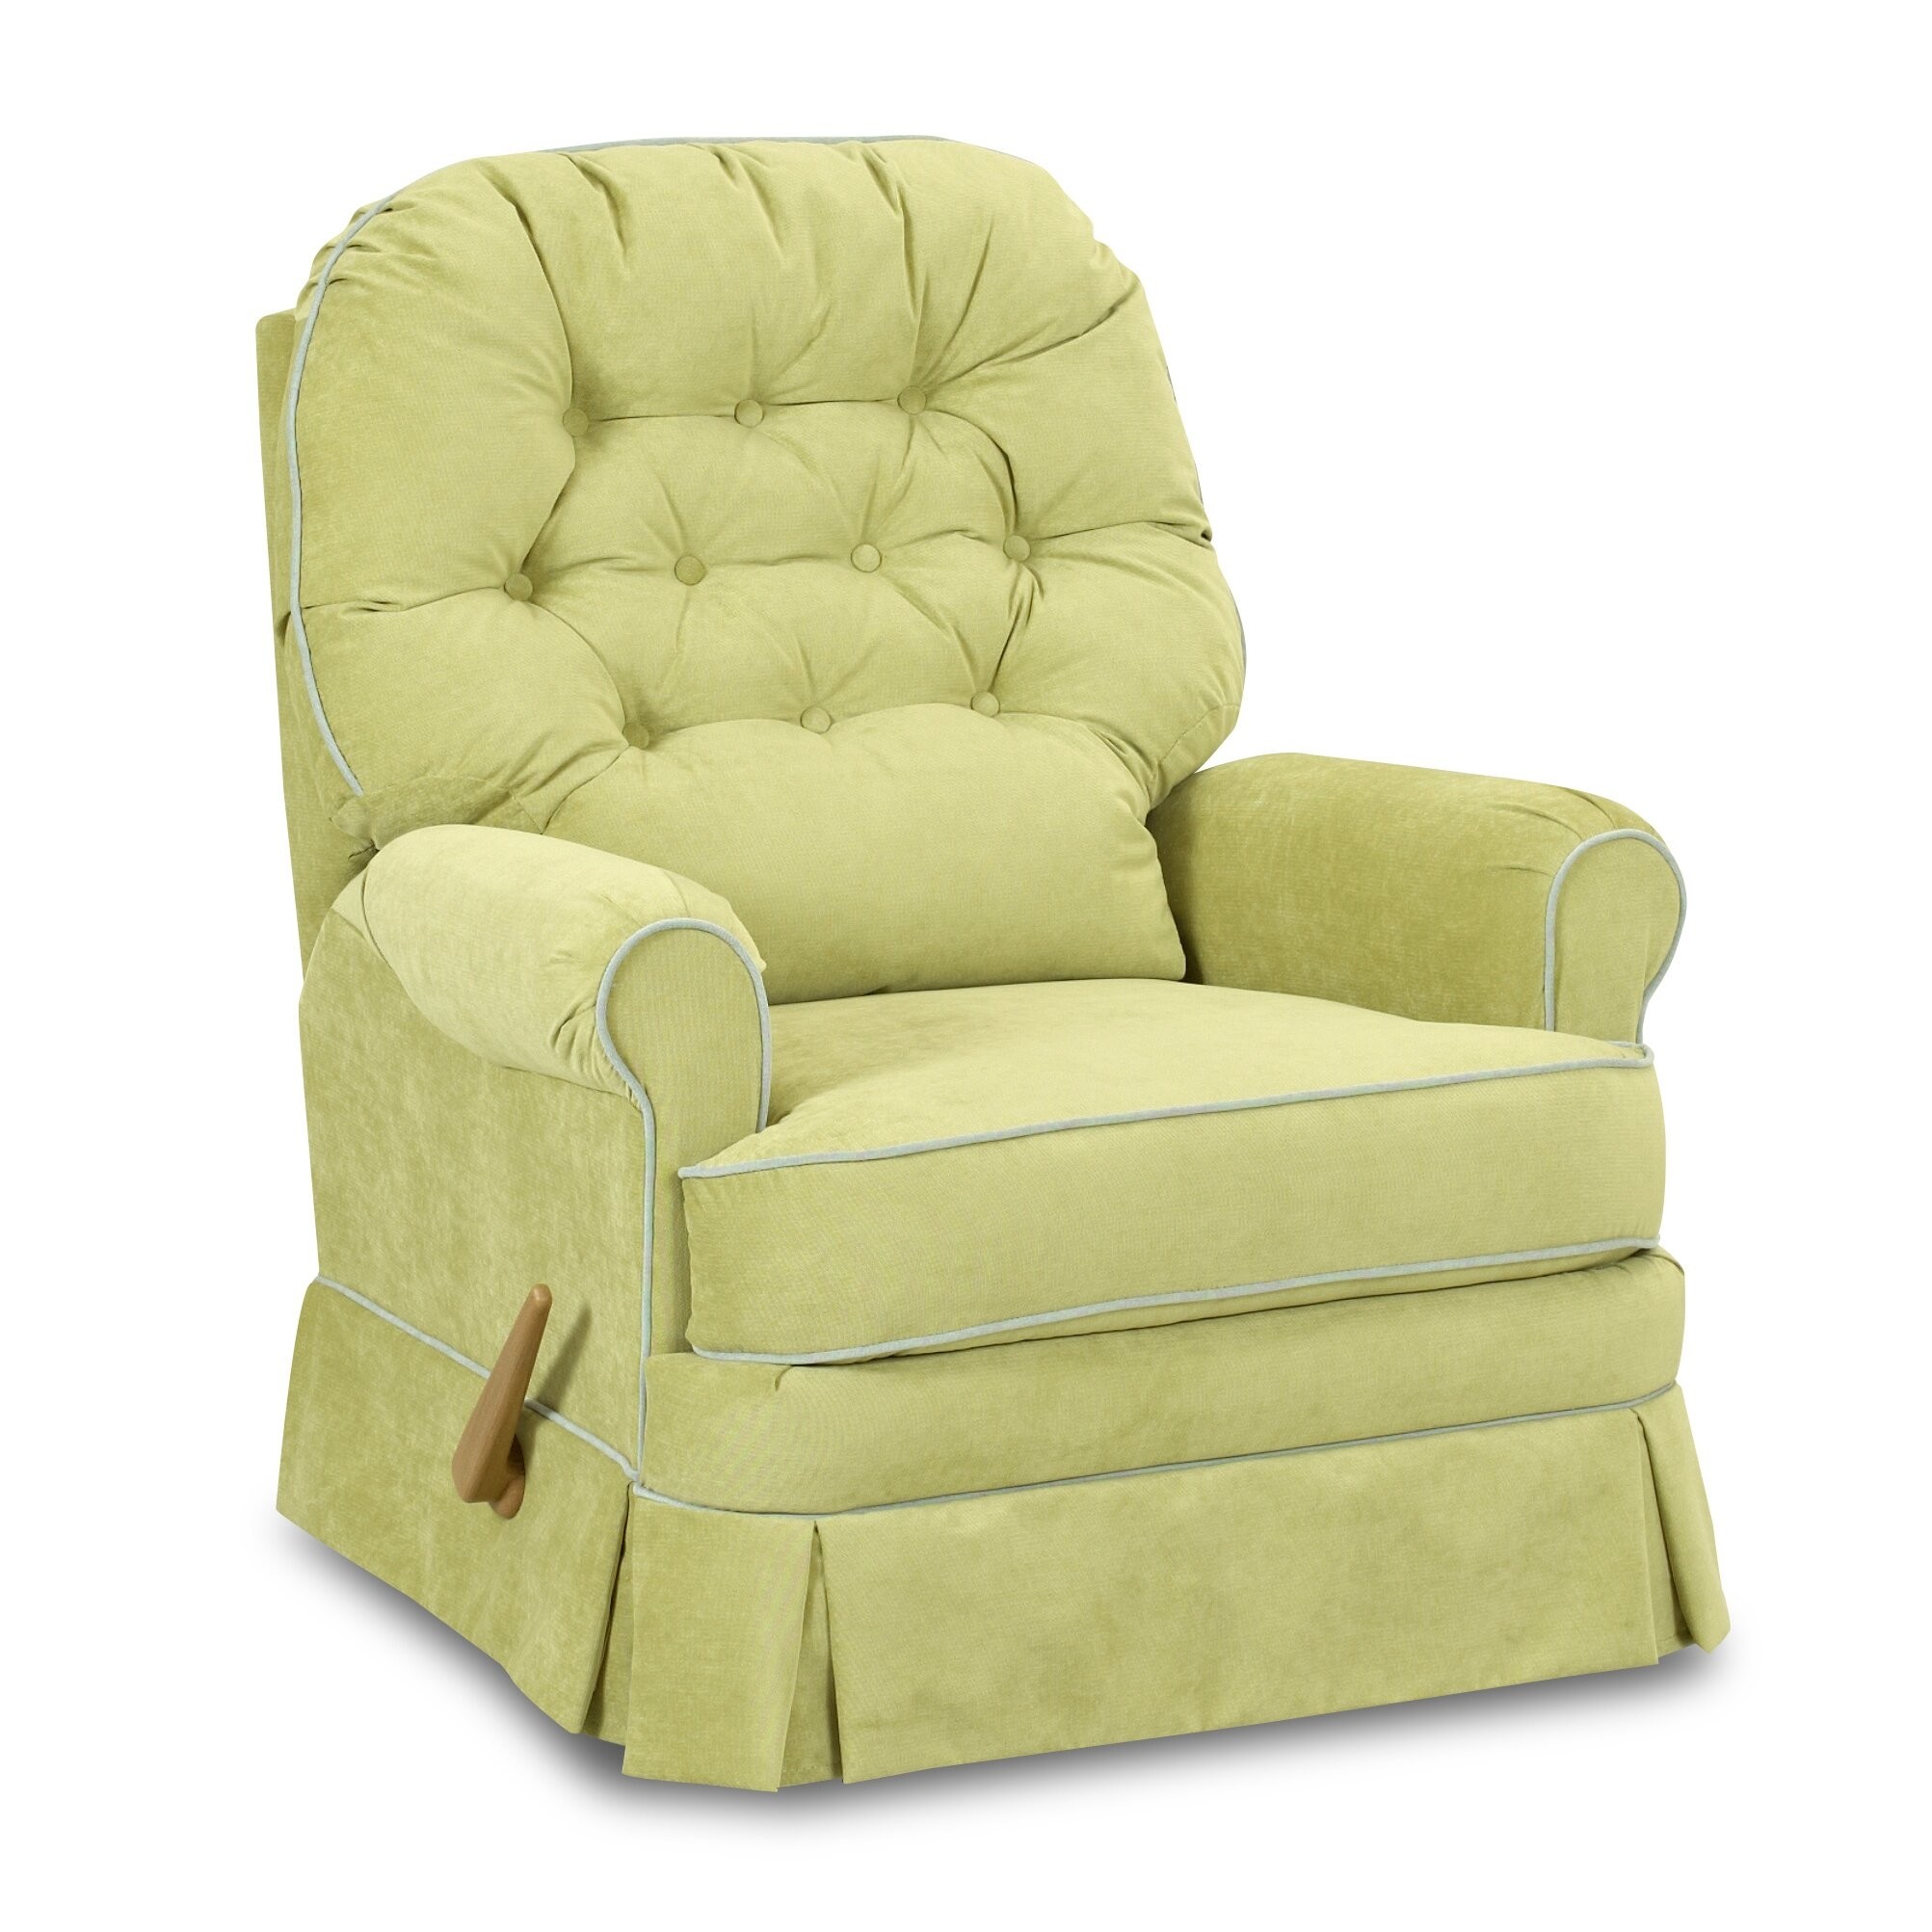 Albany recliner in berkshire berry